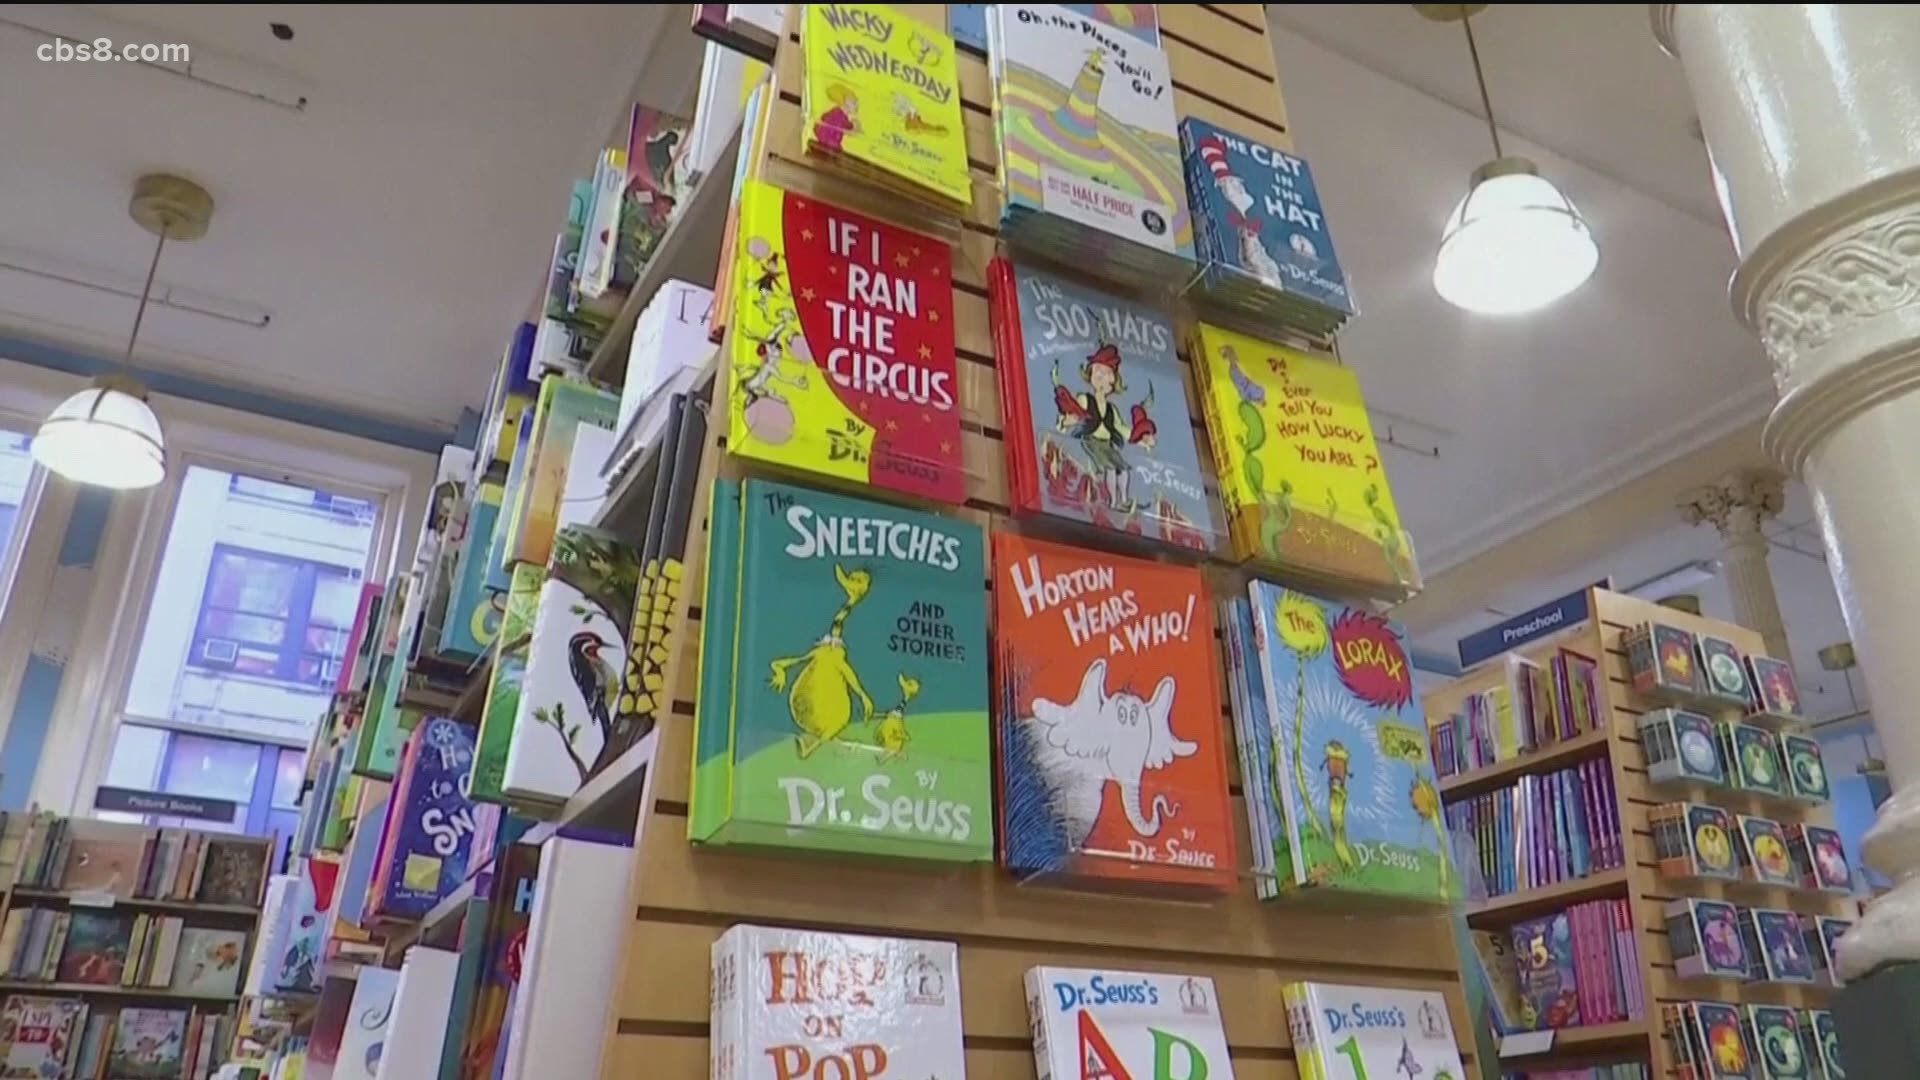 The announcement by the publishing company, Random House Children Books, does not pull the affected books off the shelves.